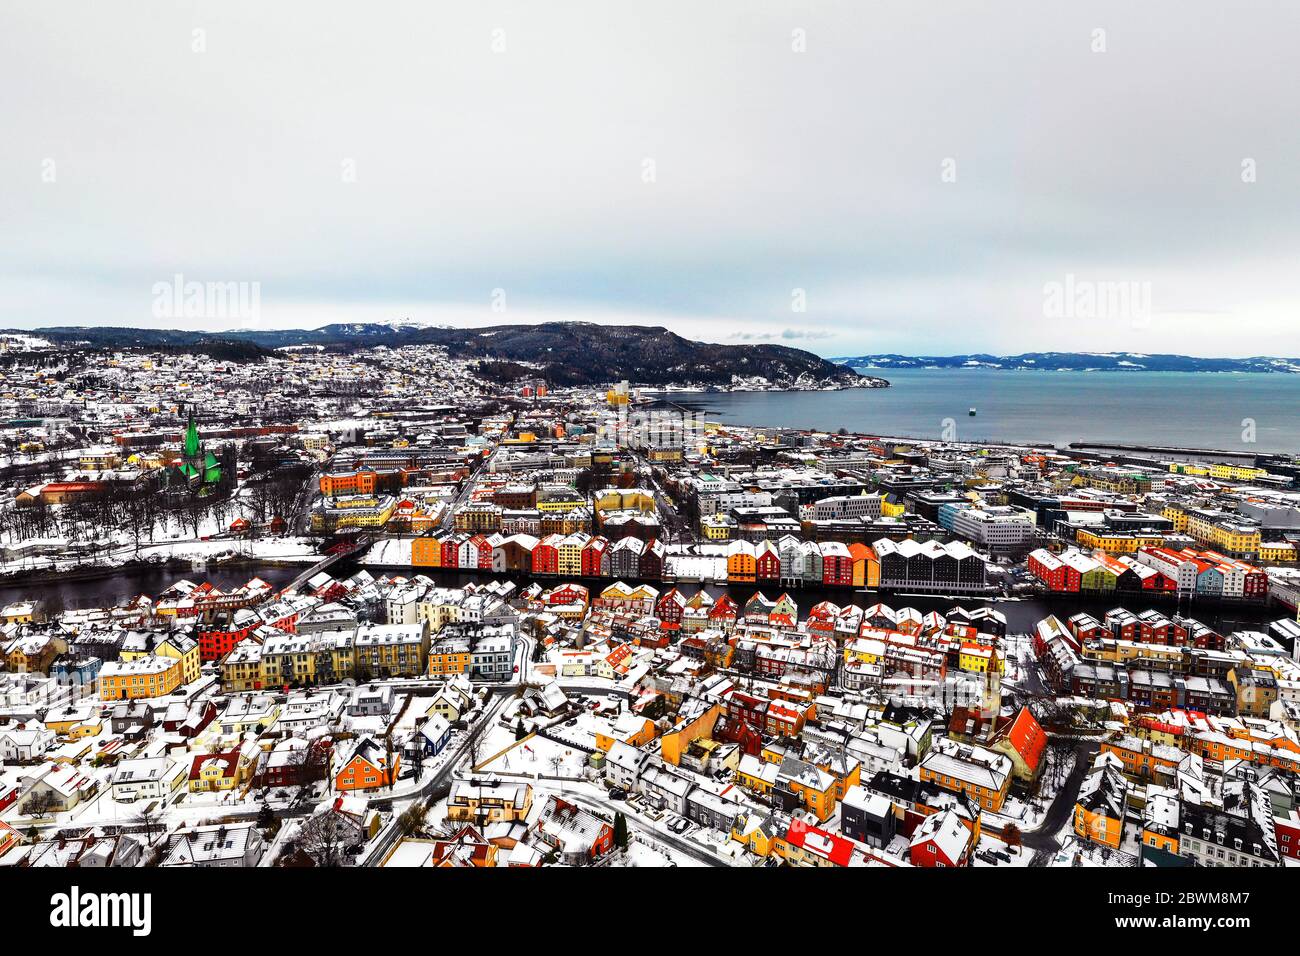 Trondheim, Norway. Aerial view of the city center in winter in Trondheim, Norway with snow, river and historical colorful buildings Stock Photo